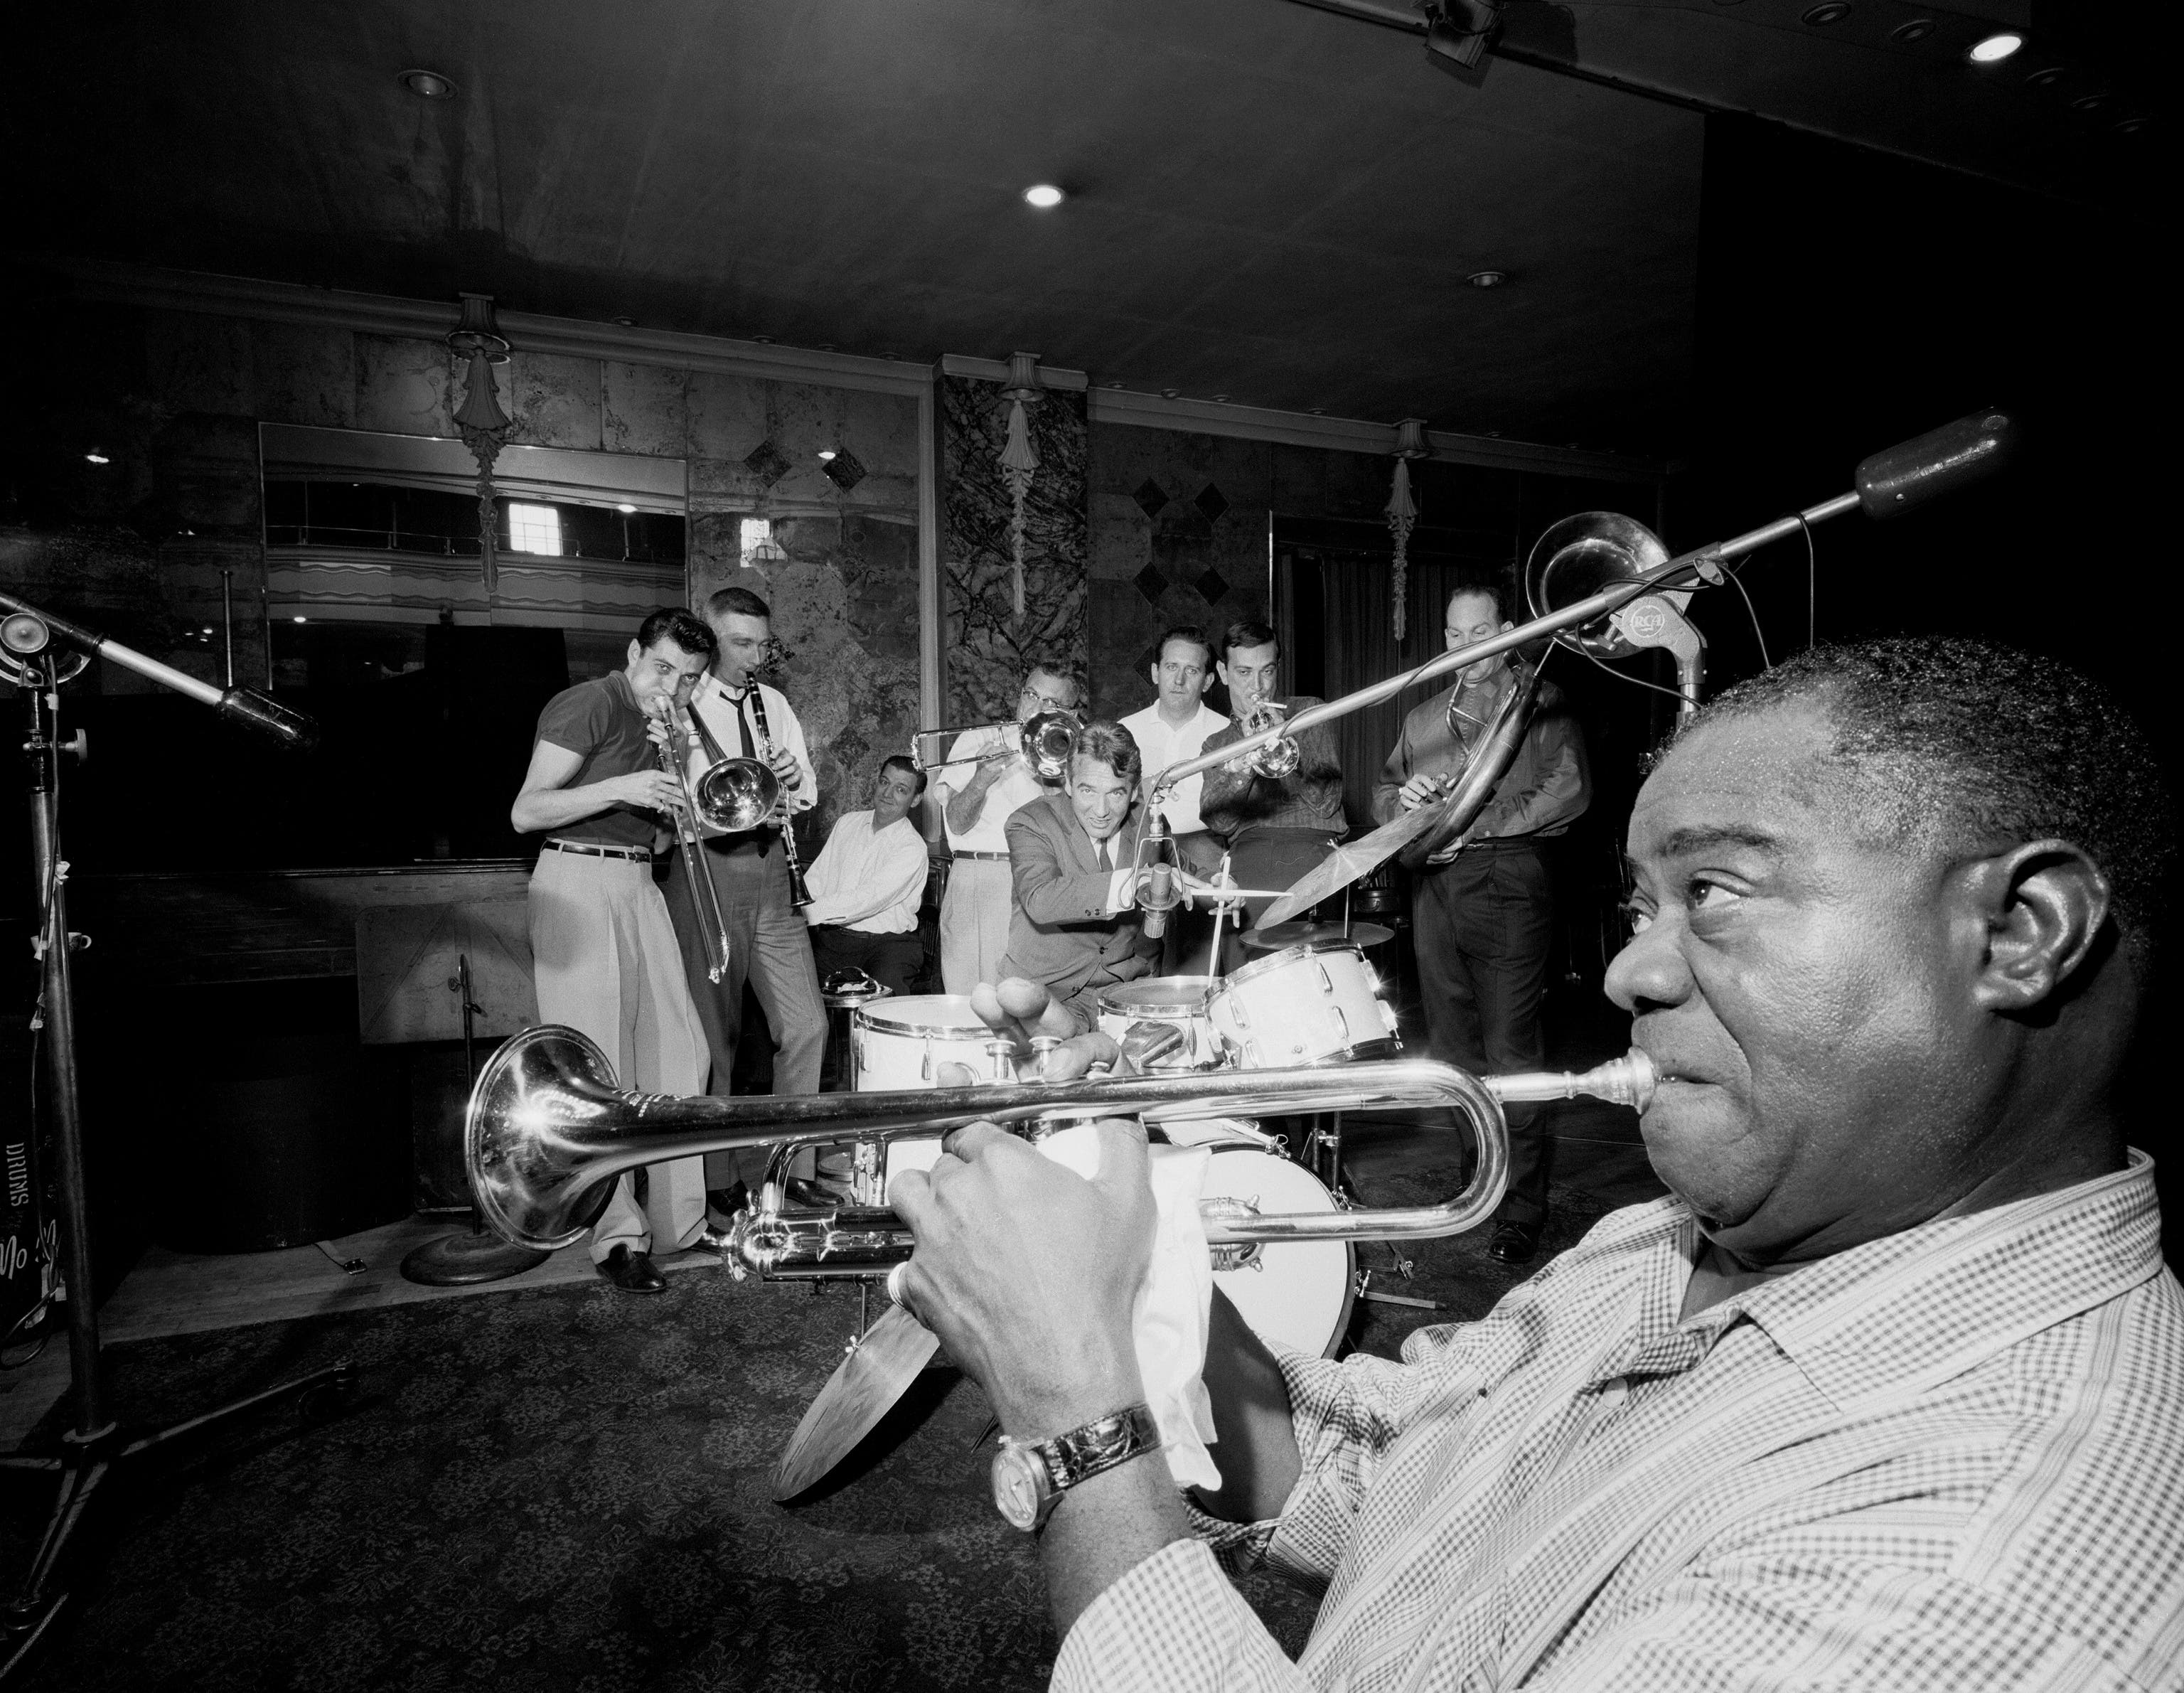 UNITED STATES - CIRCA 1920: Louis Armstrong (r.), who reshaped jazz in the 1920s and was still picking up new fans into the 1960s with his renditions of pop songs such as &quot;Hello, Dolly&quot; and &quot;Mack the Knife,&quot; plays the trumpet at a rehearsal for a recording date in early 1960 with the Dukes of Dixieland. Trumpeter Frank Assunto (background, 2nd from right) and his brother Fred (far l.) put that band together in the late 1940s to help revive the earliest form of traditional jazz, born in their native New Orleans. That&#039;s another jazz legend, Gene Krupa, sitting at the drums; the Assuntos&#039; father, Pap Jac, is the trombonist behind Krupa. The others in the band are (left to right) Jerry Fuller, on clarinet; Stanley Mendelson, at the piano; Owen Mahoney, the bands&#039; regular drummer; and Richard Matteson, handling bass. (Photo by NY Daily News Archive via Getty Images)